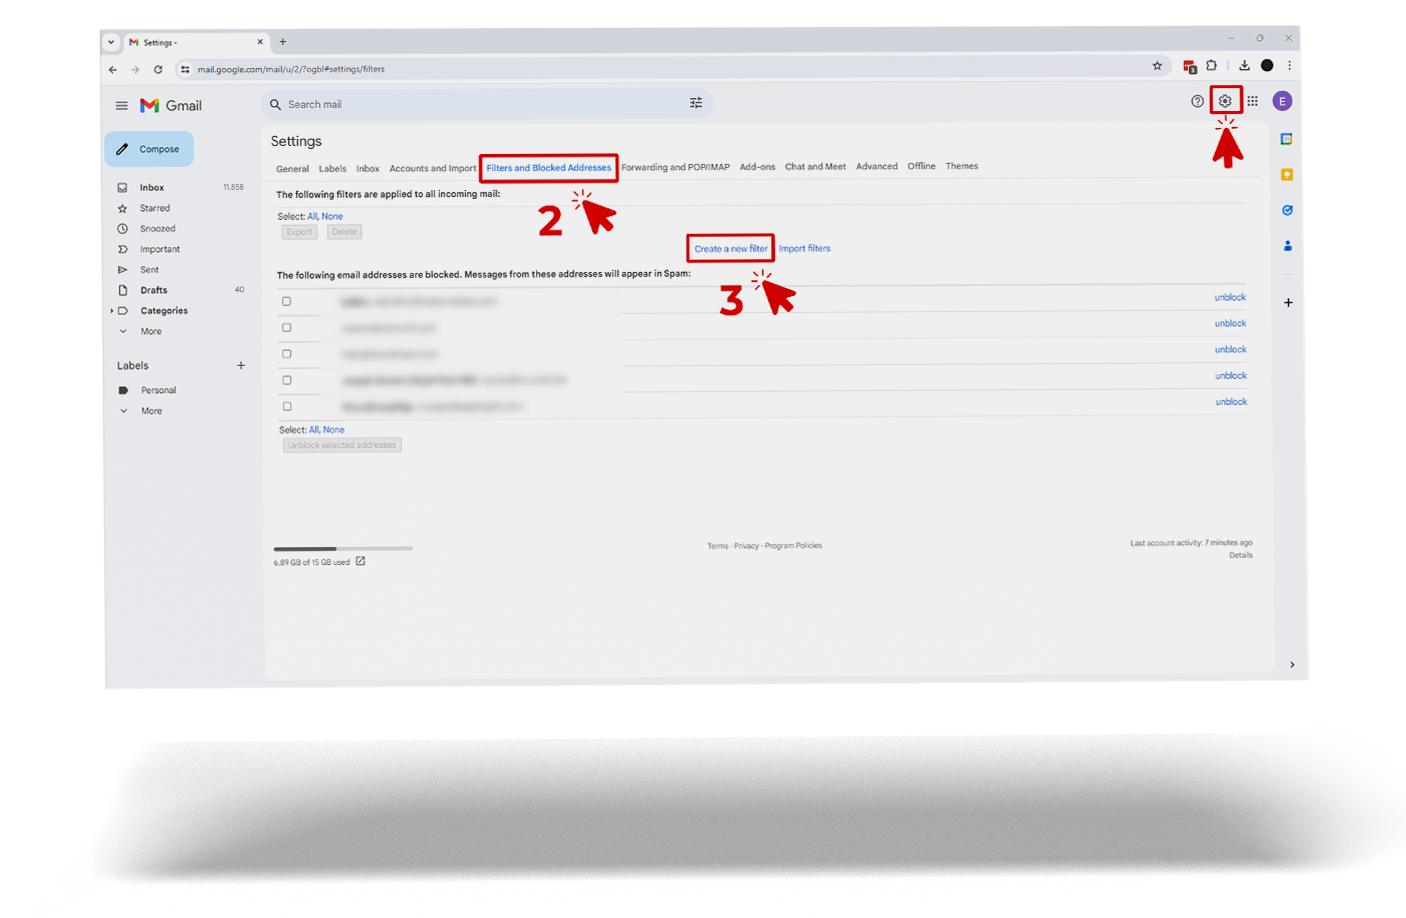 A screenshot showing the filters and blocked addresses settings in Gmail. Red arrows highlight the progression from the 'Settings' icon to the 'Filters and Blocked Addresses' tab and finally to the 'Create a new filter' link, indicating the steps to initiate the creation of a new email filter.